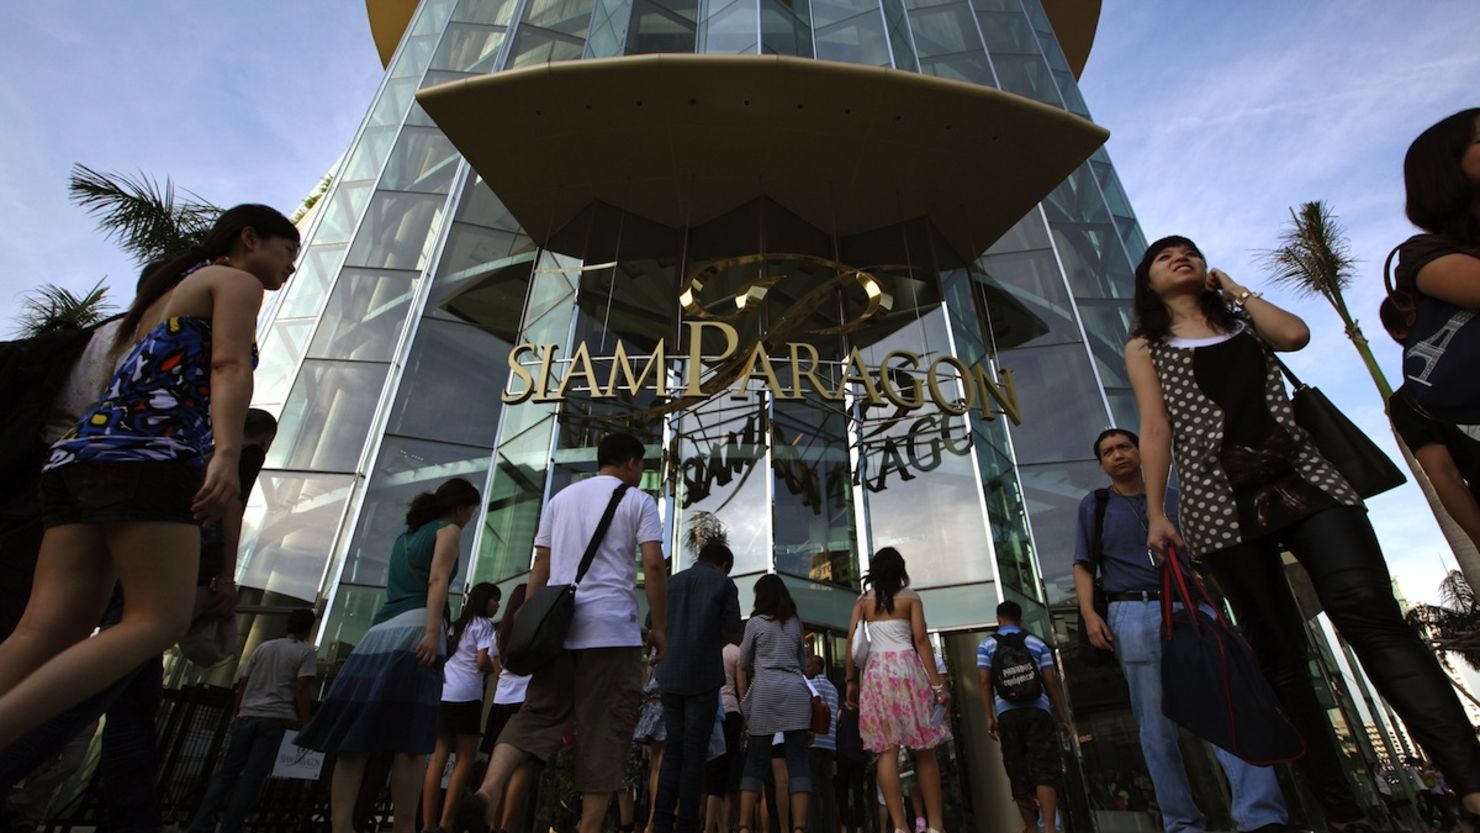 This 2013 photo shows the Siam Paragon mall in Bangkok, Thailand.